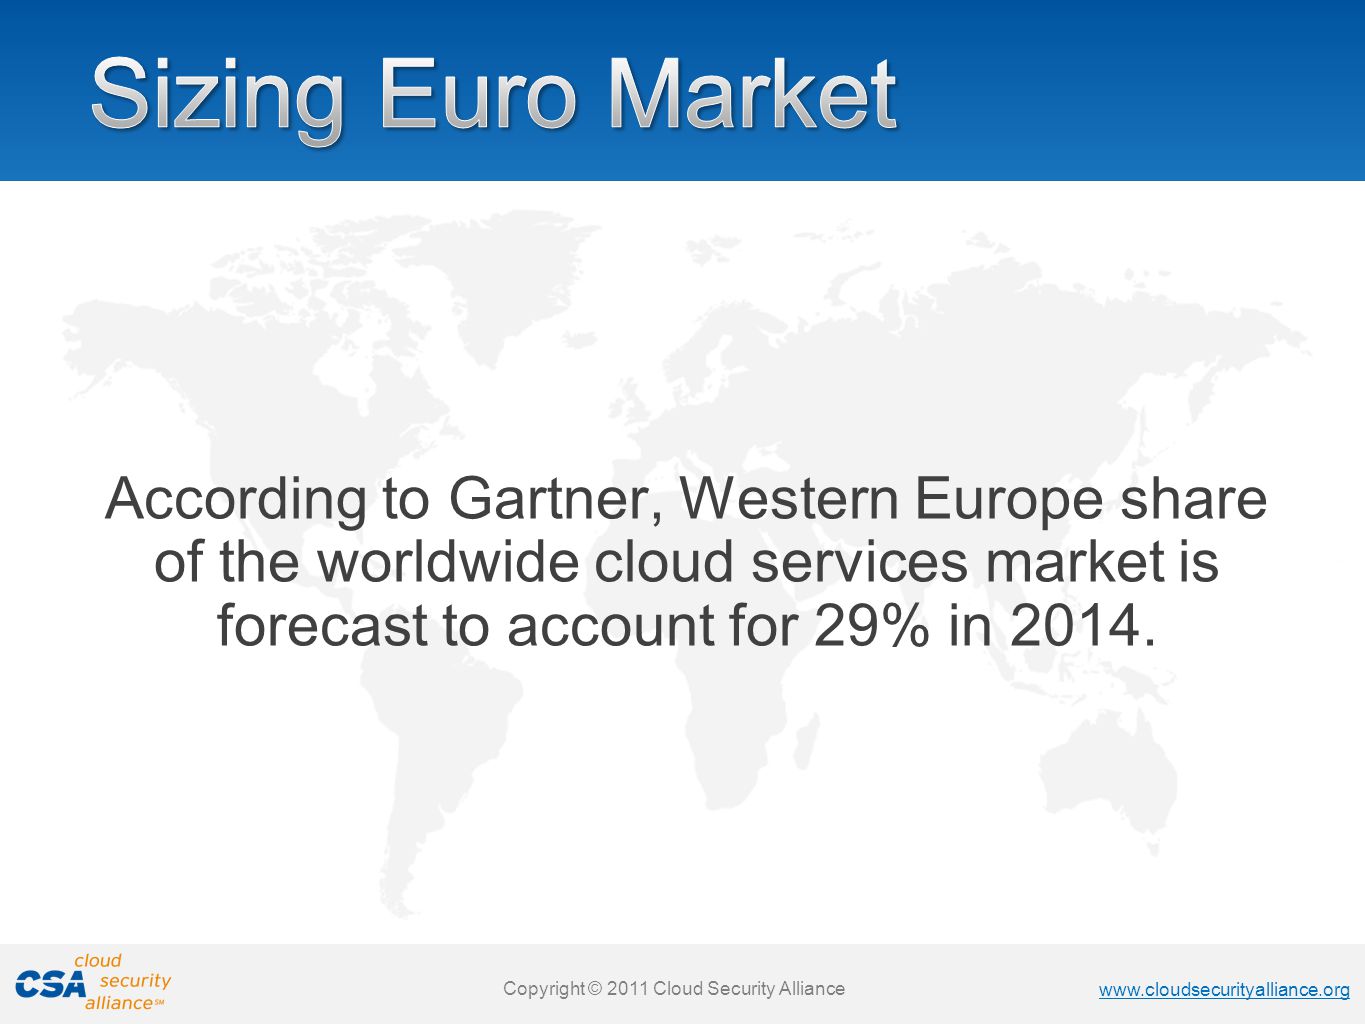 Copyright © 2011 Cloud Security Alliance   Copyright © 2011 Cloud Security Alliance   Copyright © 2011 Cloud Security Alliance   Copyright © 2011 Cloud Security Alliance According to Gartner, Western Europe share of the worldwide cloud services market is forecast to account for 29% in 2014.